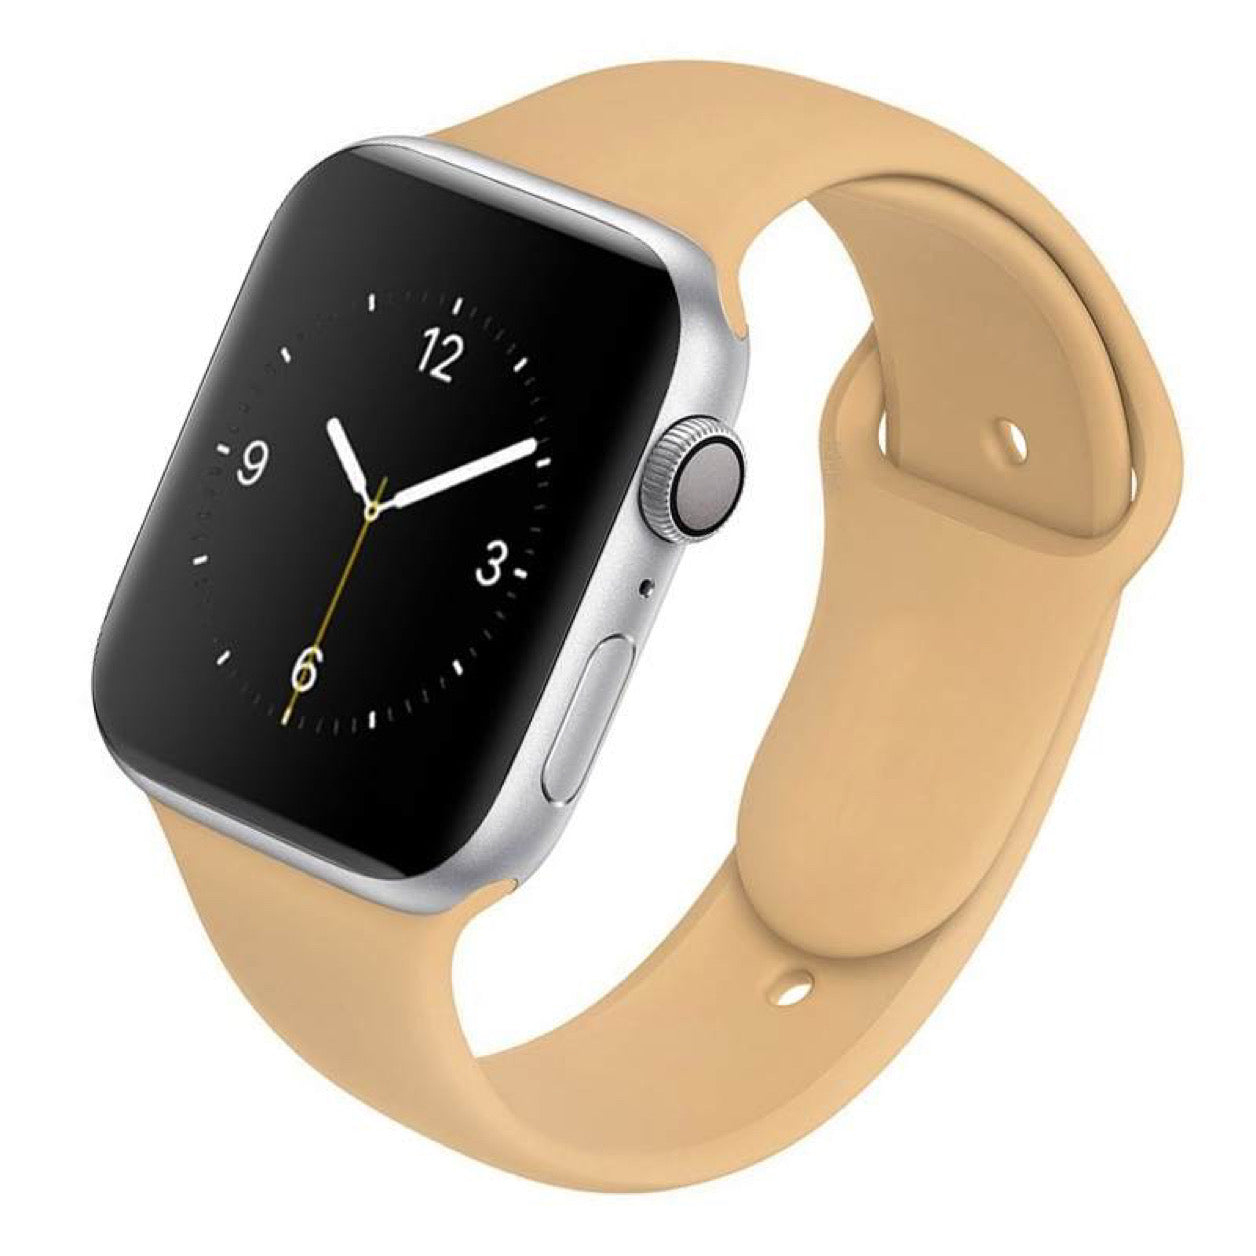 Nude Apple Watch Strap - thefonecasecompany